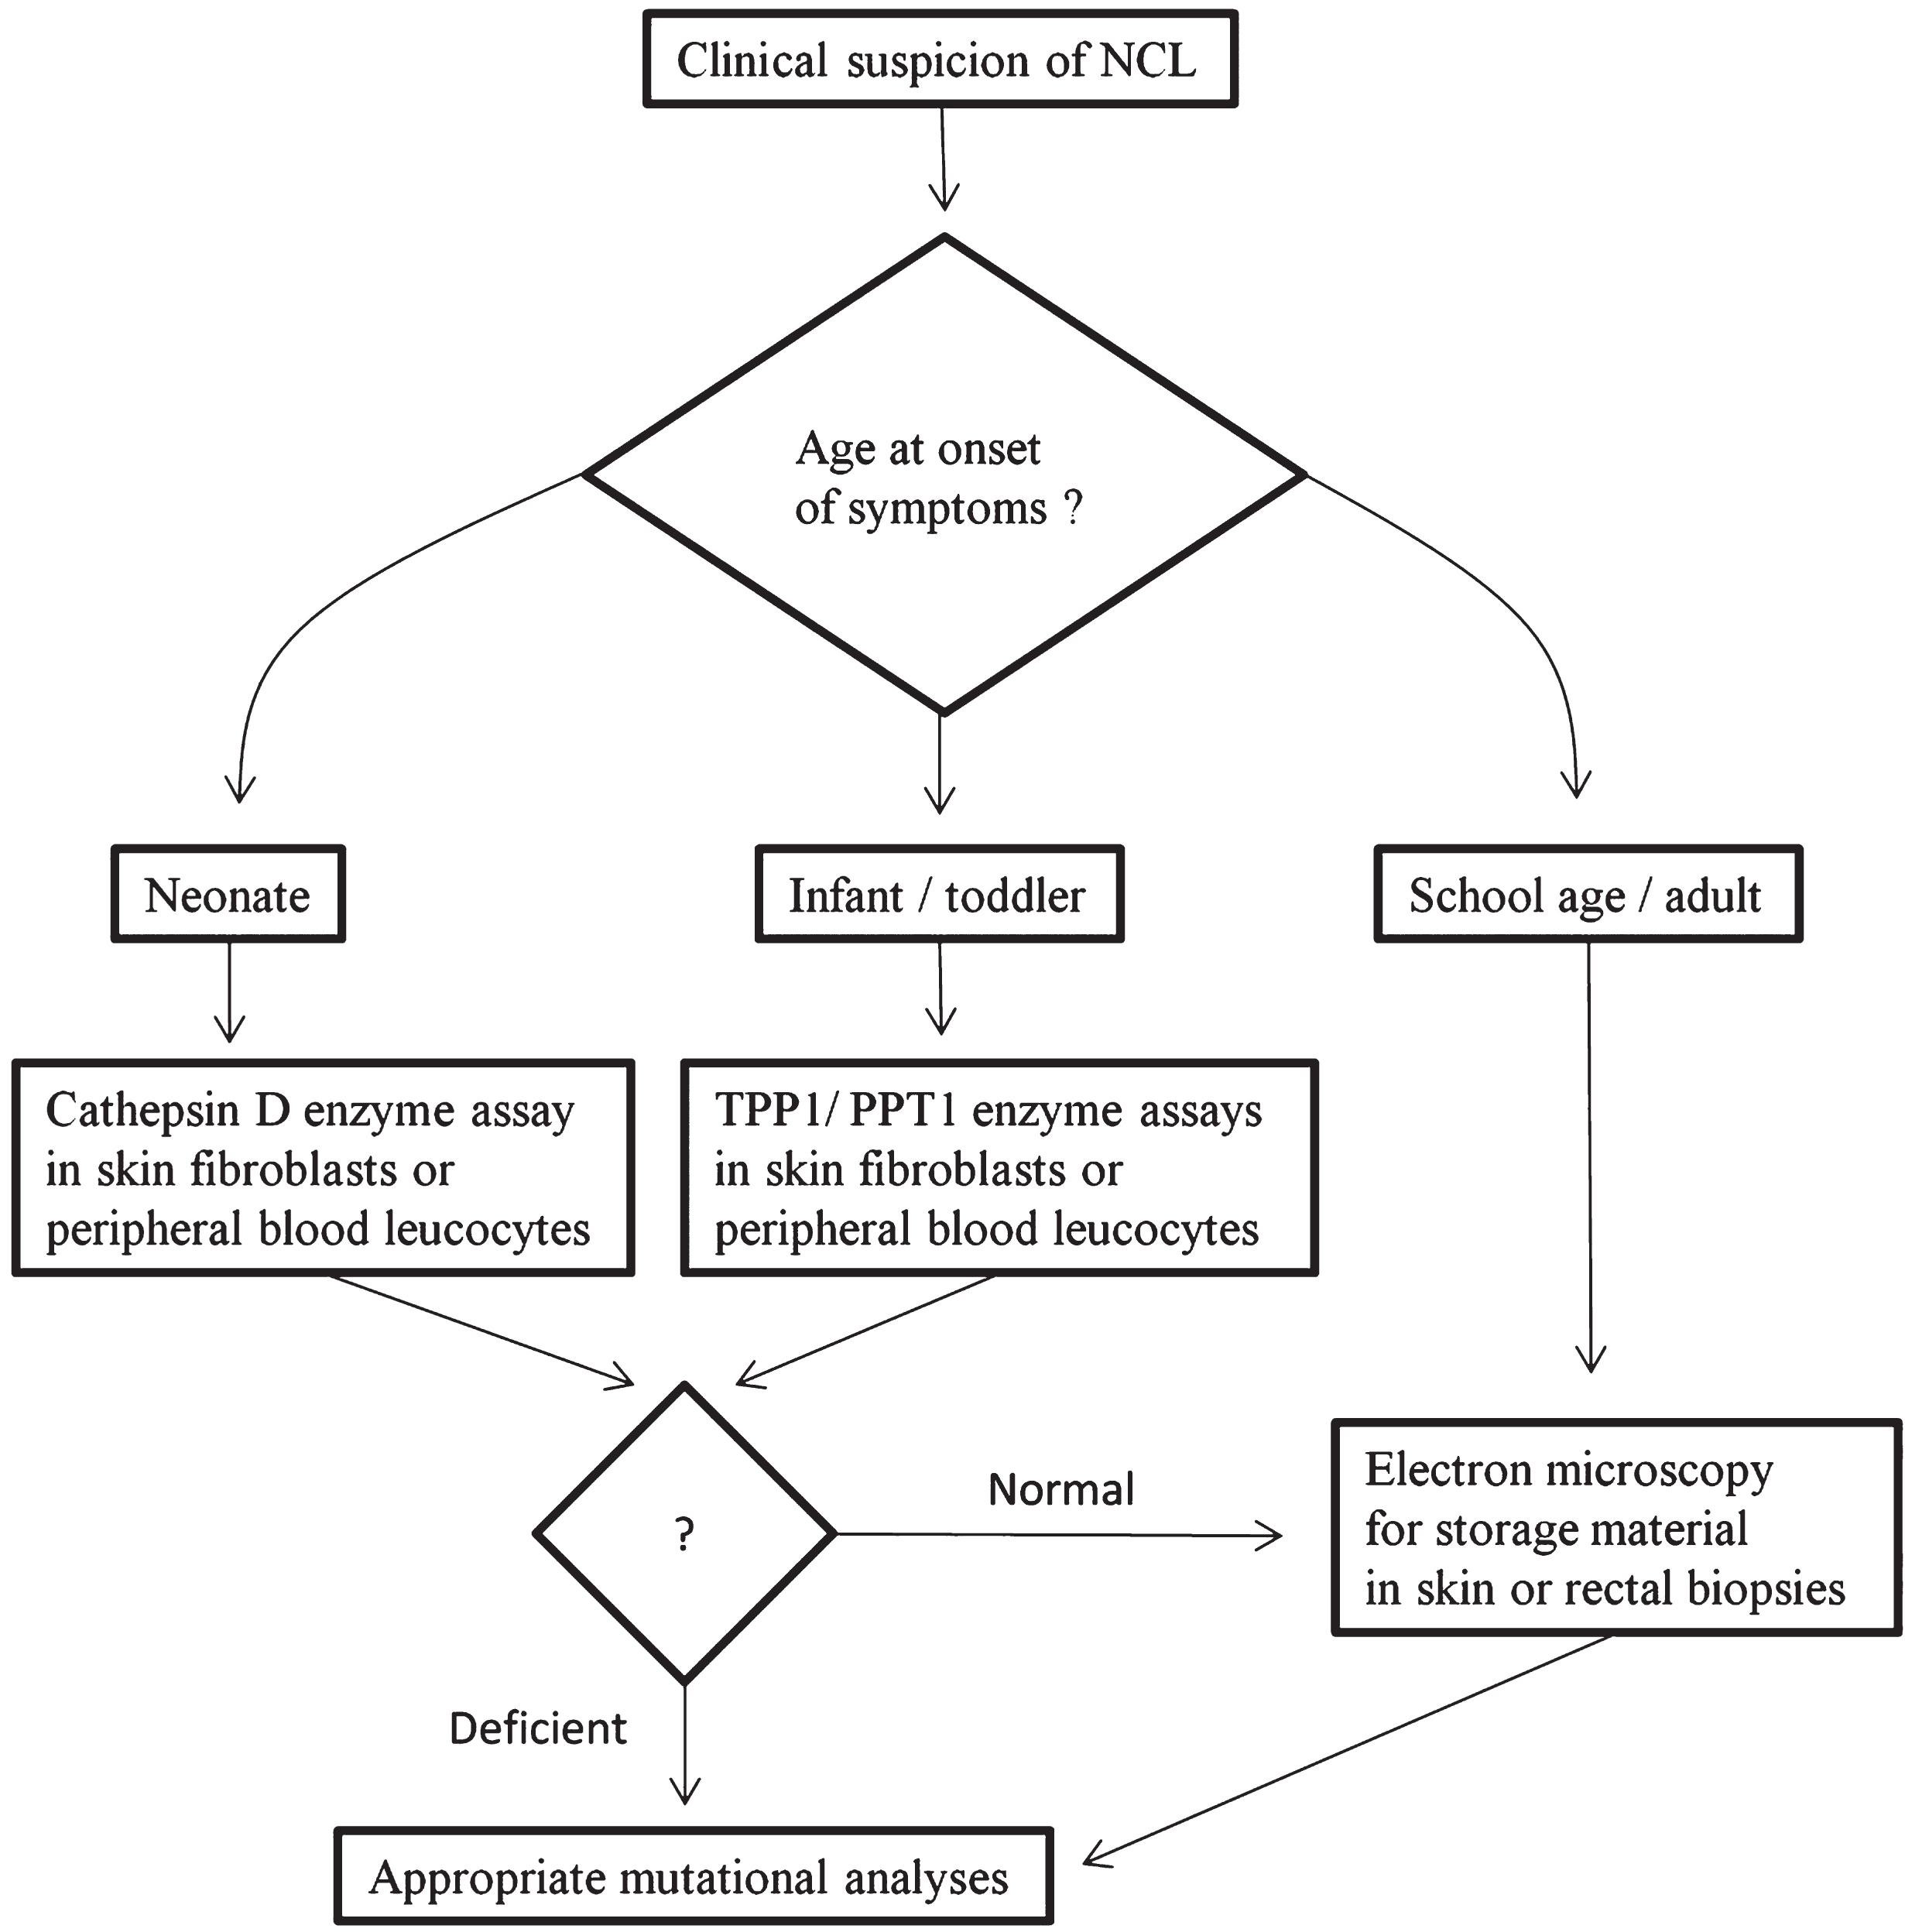 Suggested diagnostic algorithm for Neuronal Ceroid-Lipofuscinoses (NCLs).